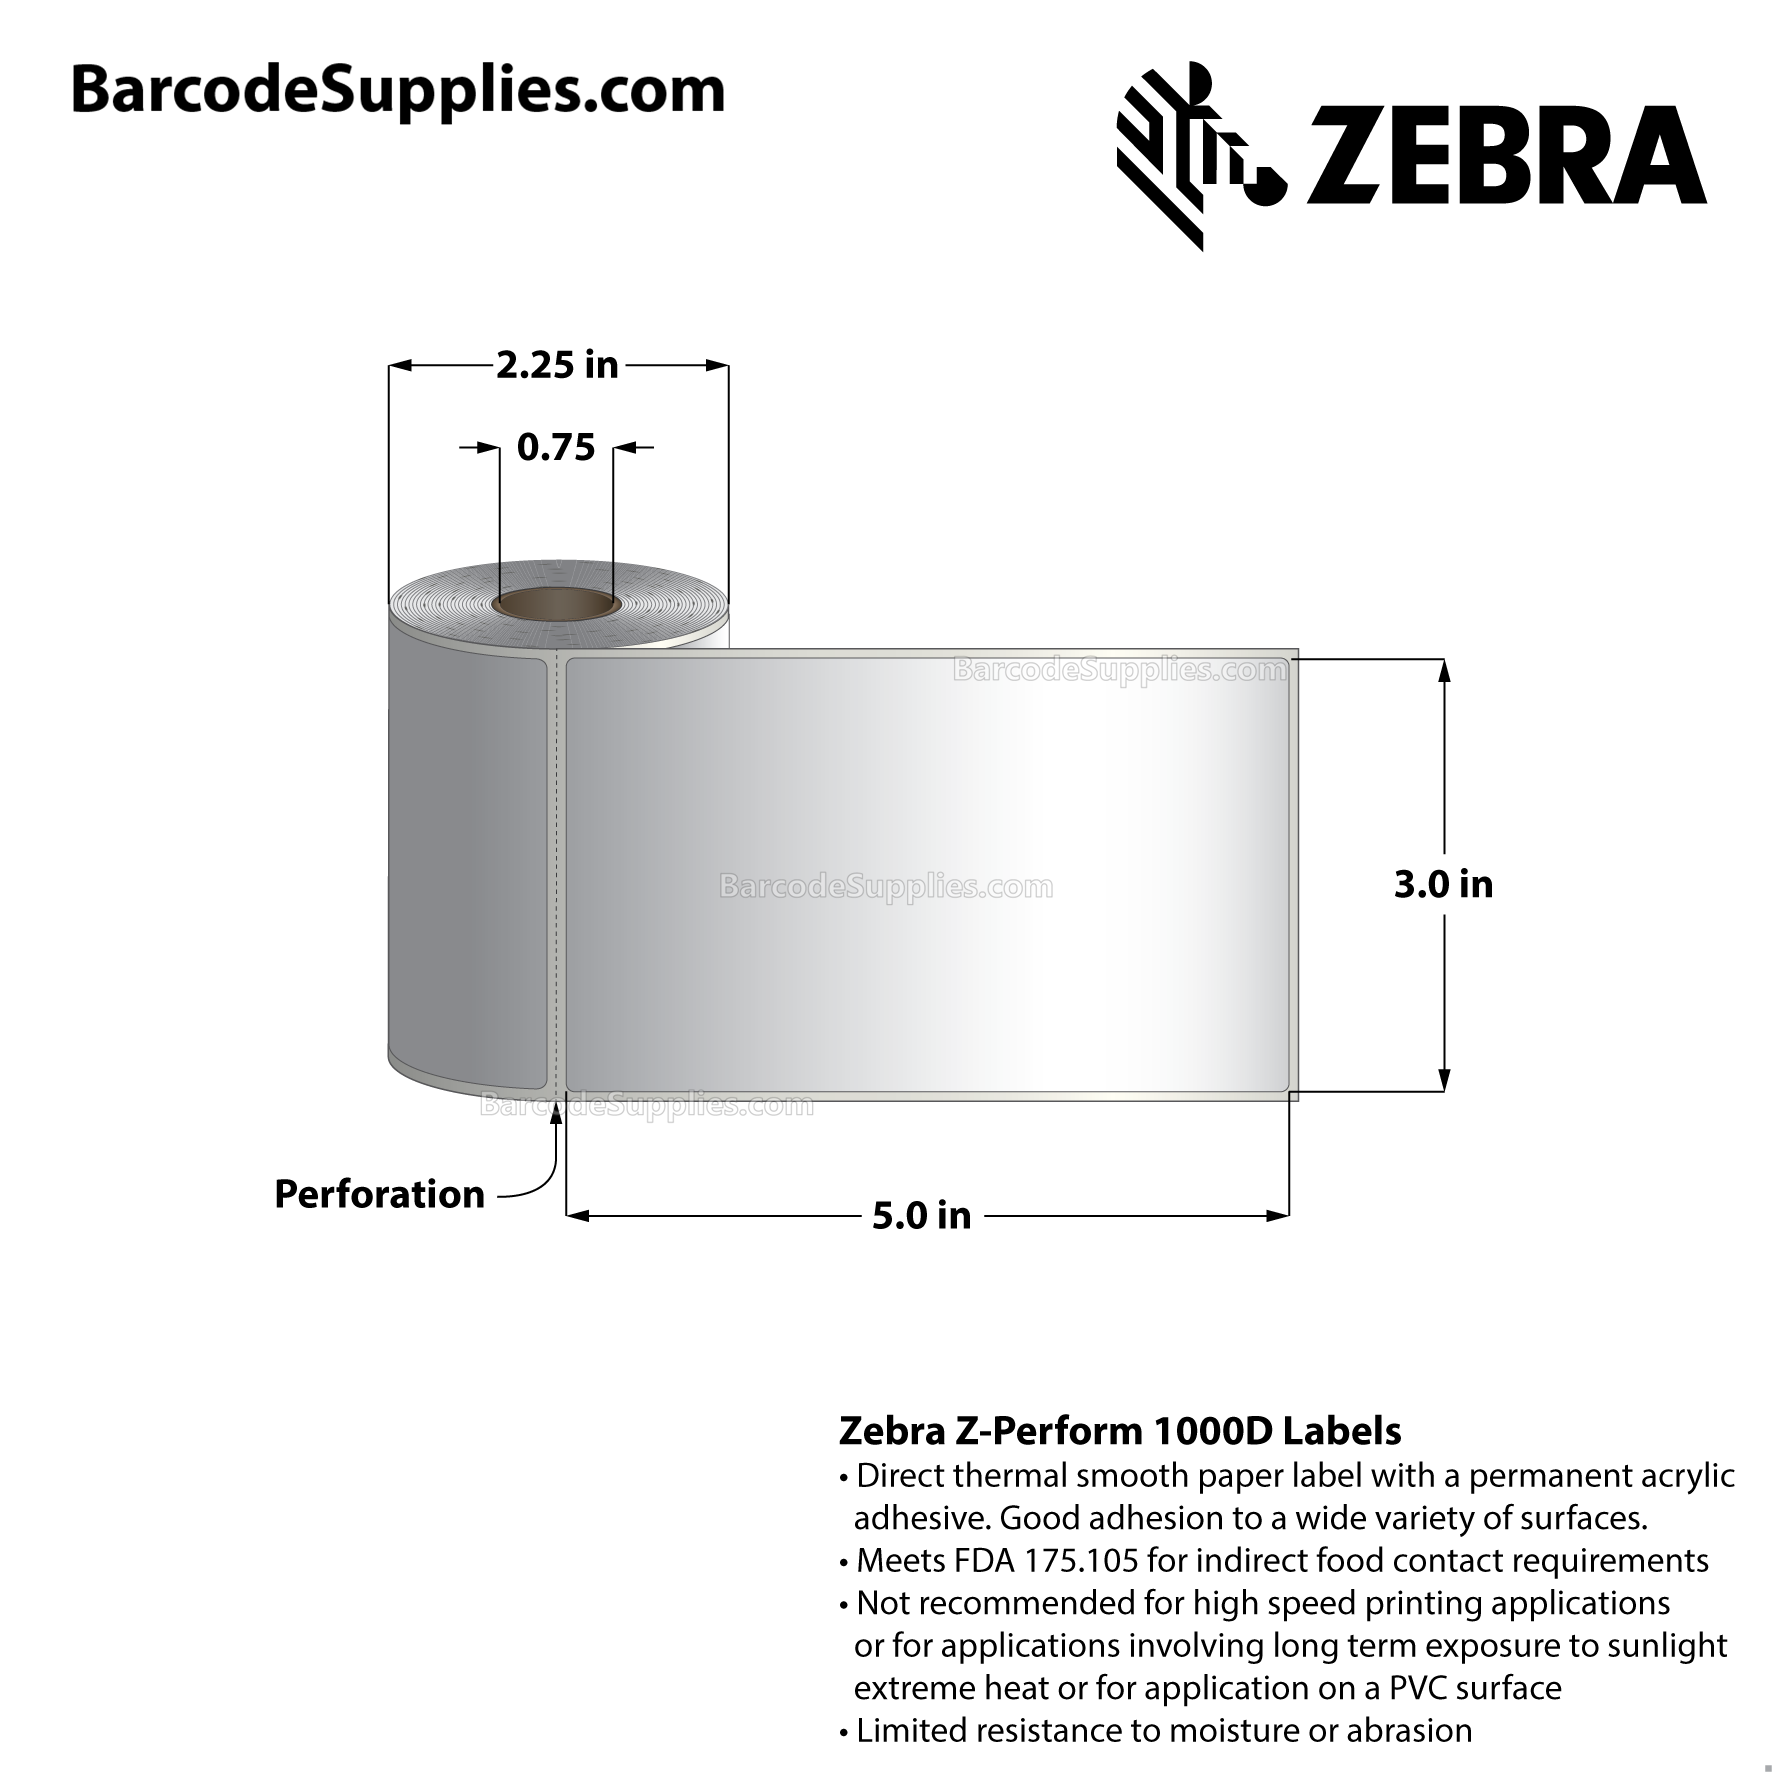 3 x 5 Direct Thermal White Z-Perform 1000D Labels With Permanent Adhesive - Perforated - 95 Labels Per Roll - Carton Of 36 Rolls - 3420 Labels Total - MPN: 10026370